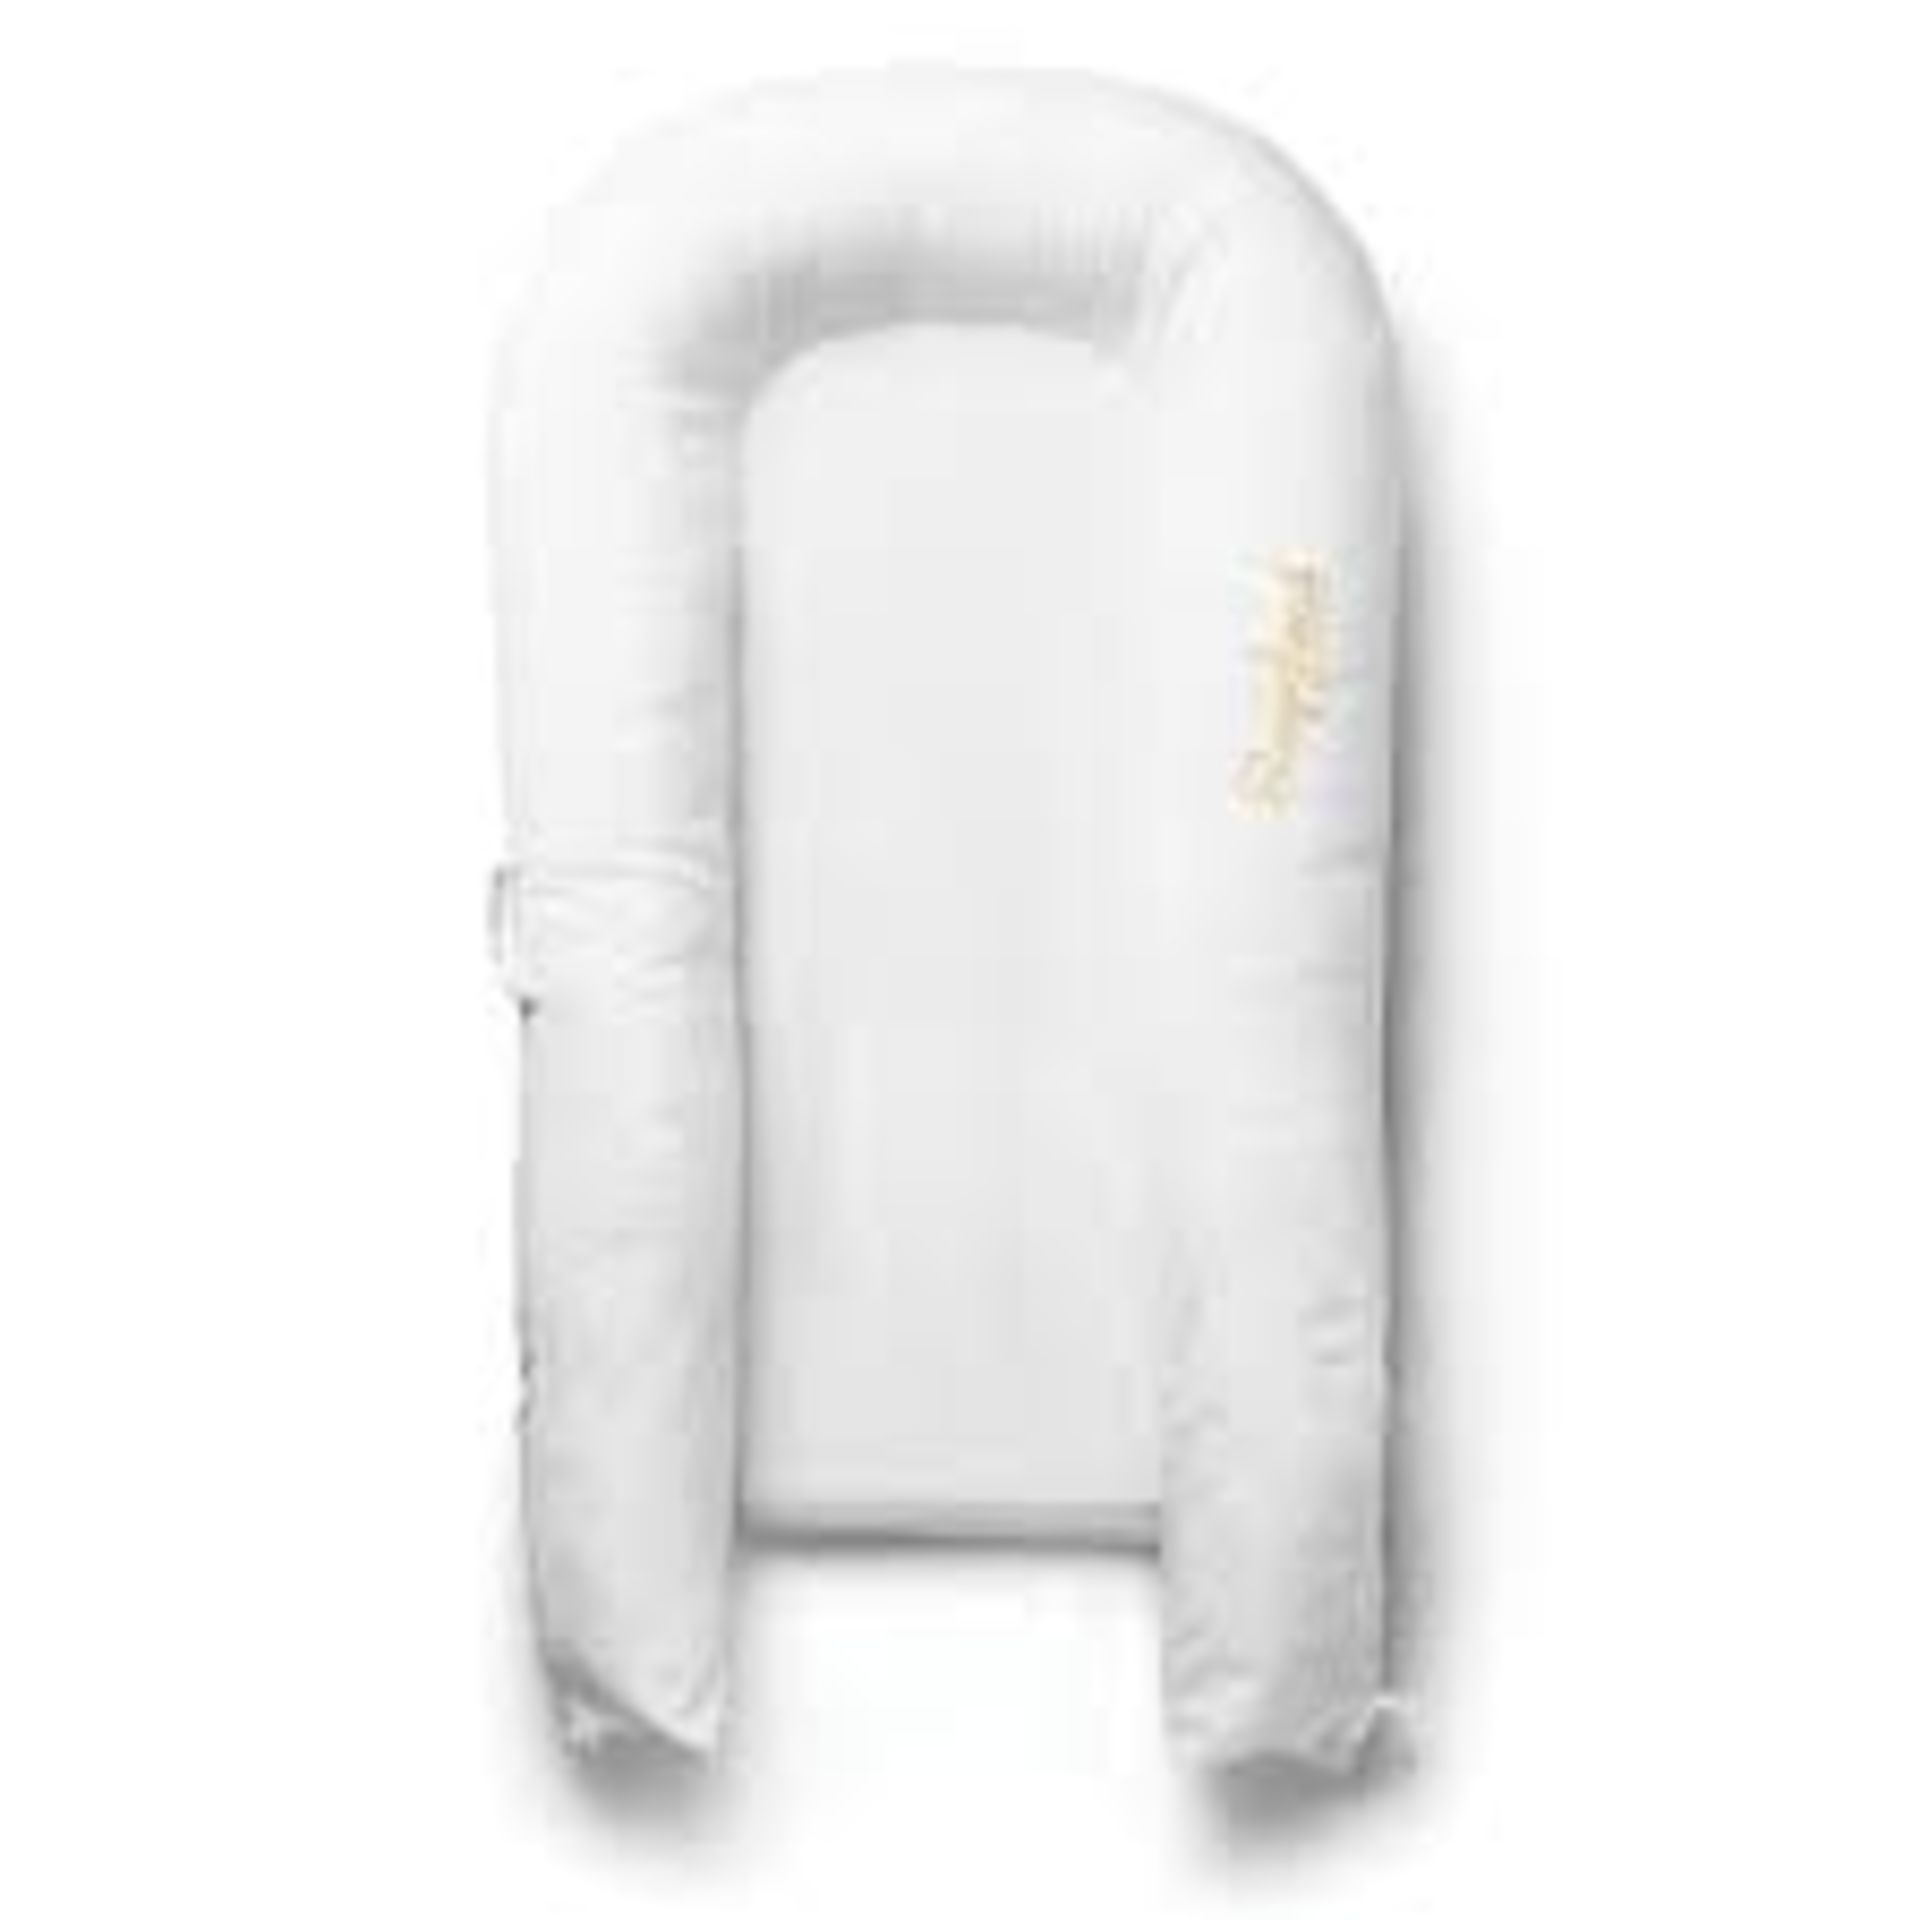 Sleepyhead Pristine Large Deluxe Travel Sleeping Pod RRP £205 (RET00608524) (Public Viewing and